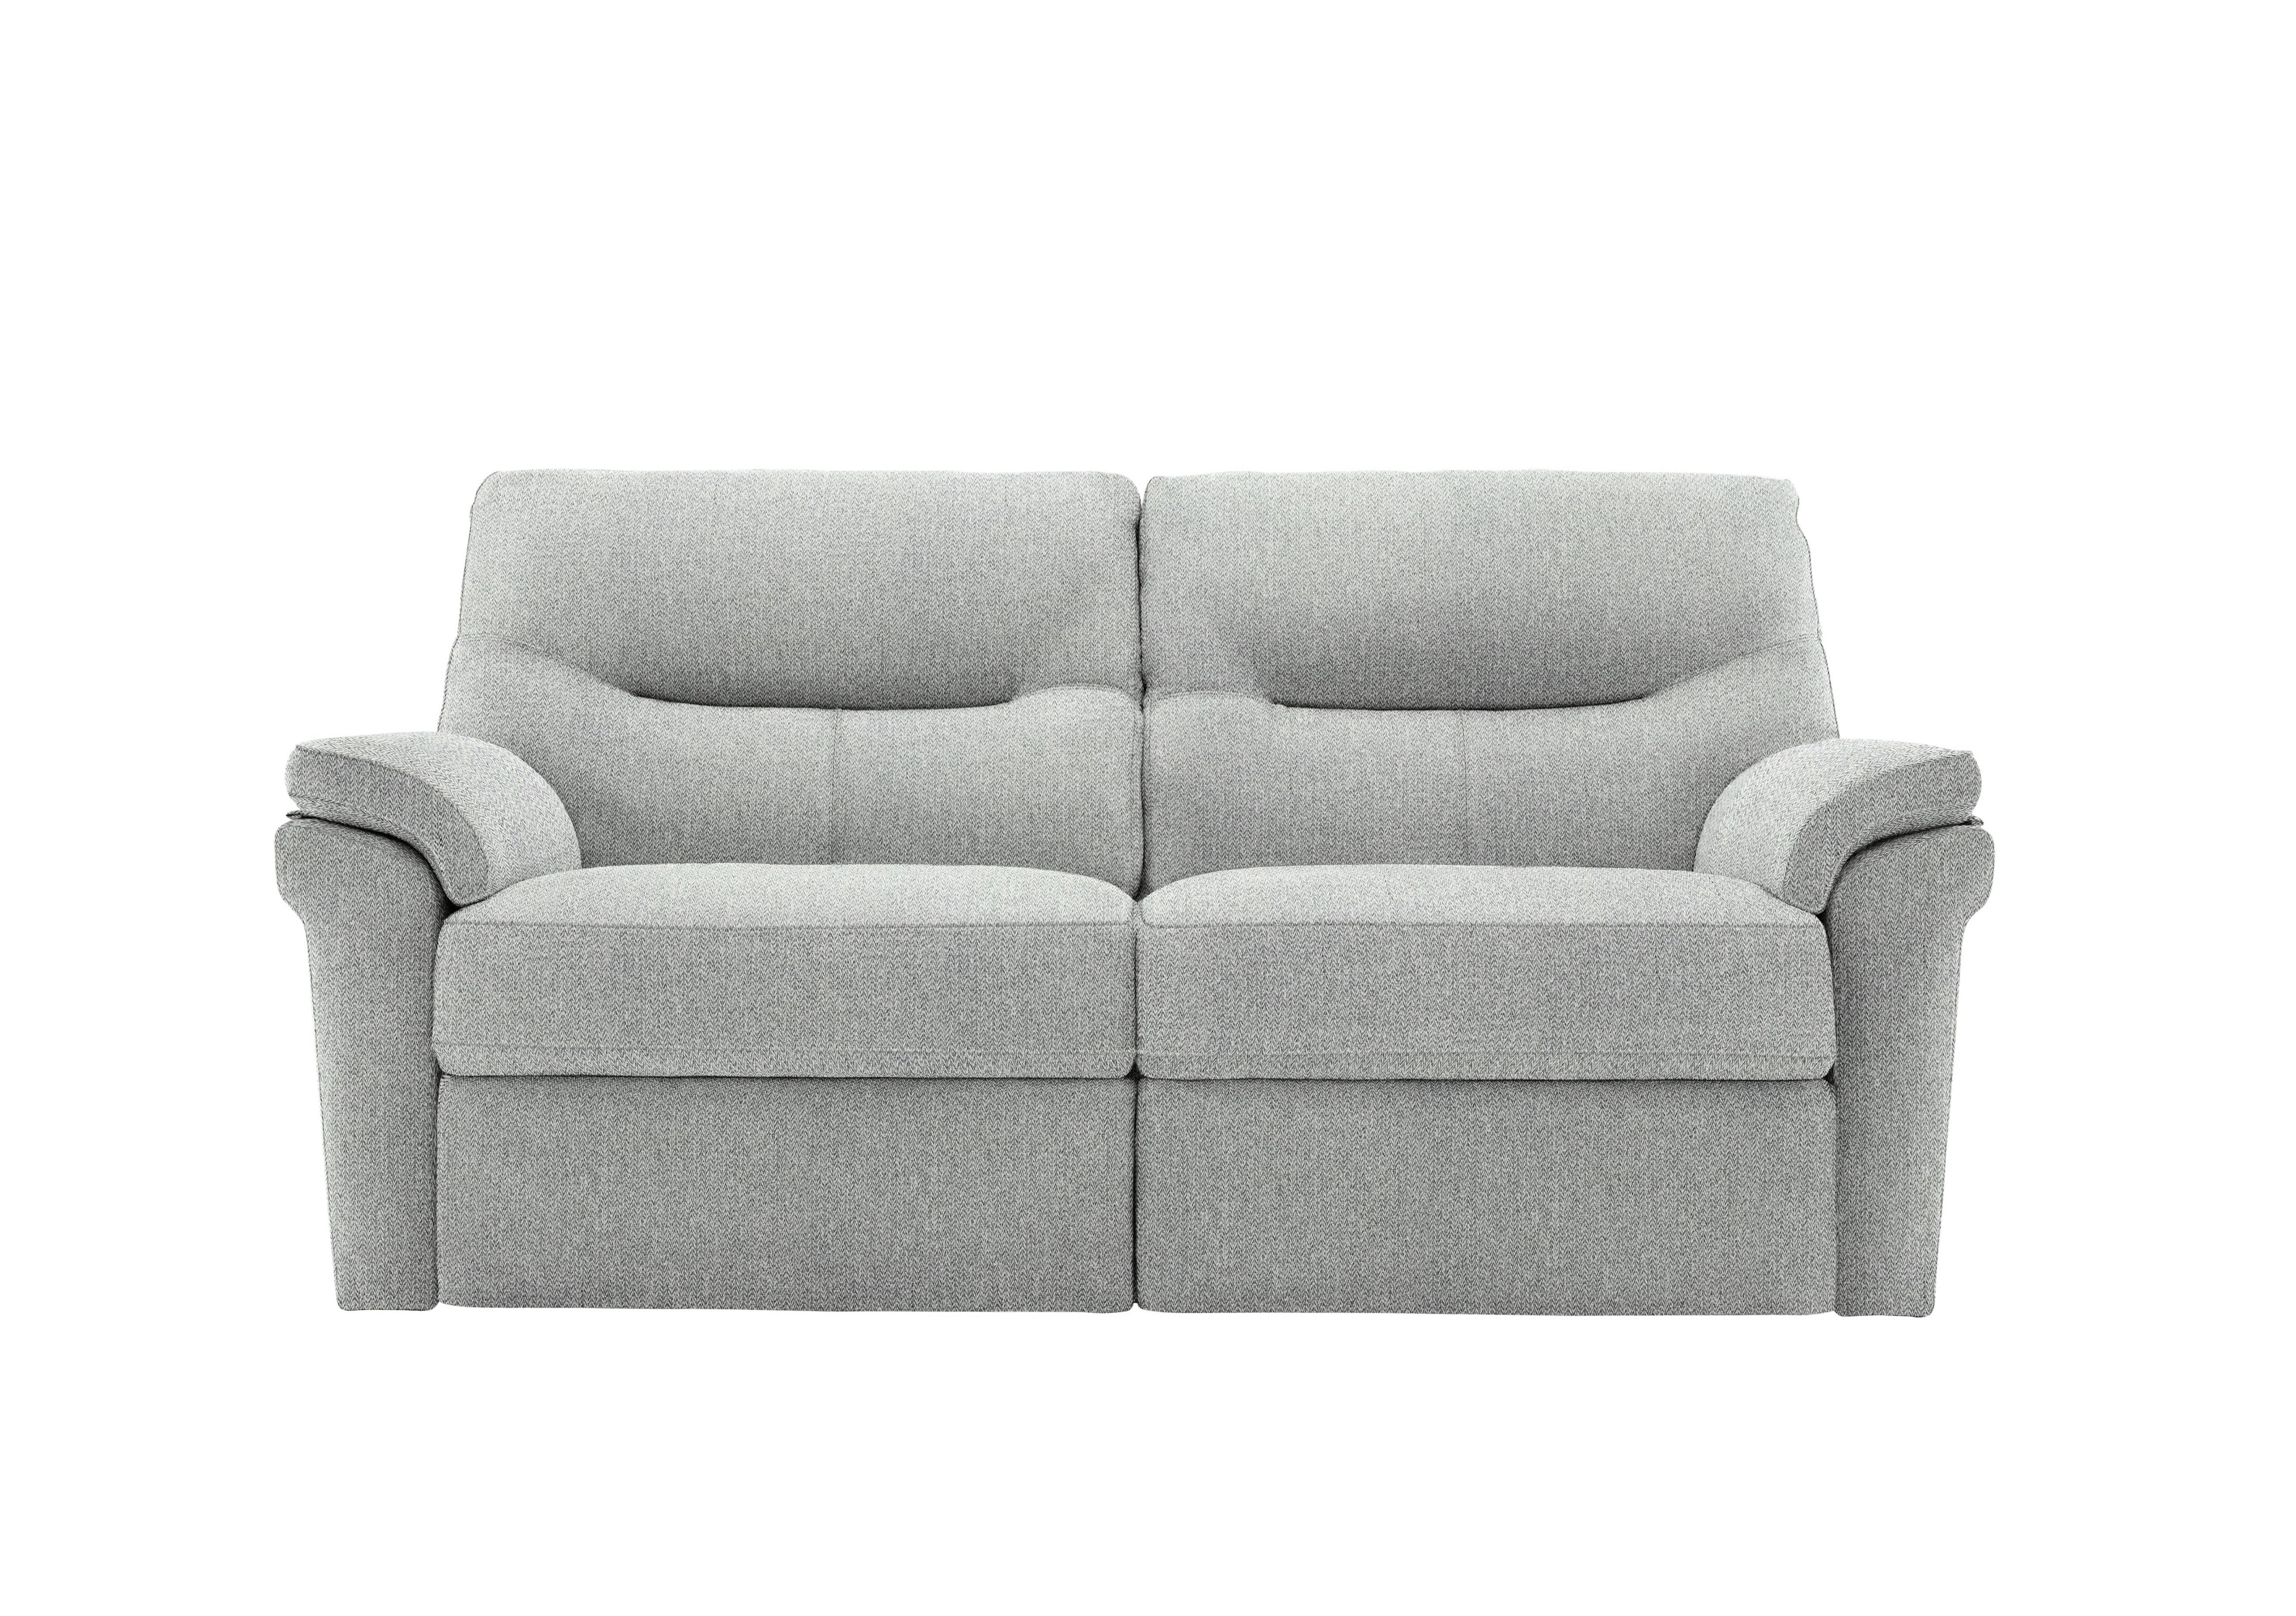 Seattle 2.5 Seater Fabric Sofa in A011 Swift Cygnet on Furniture Village